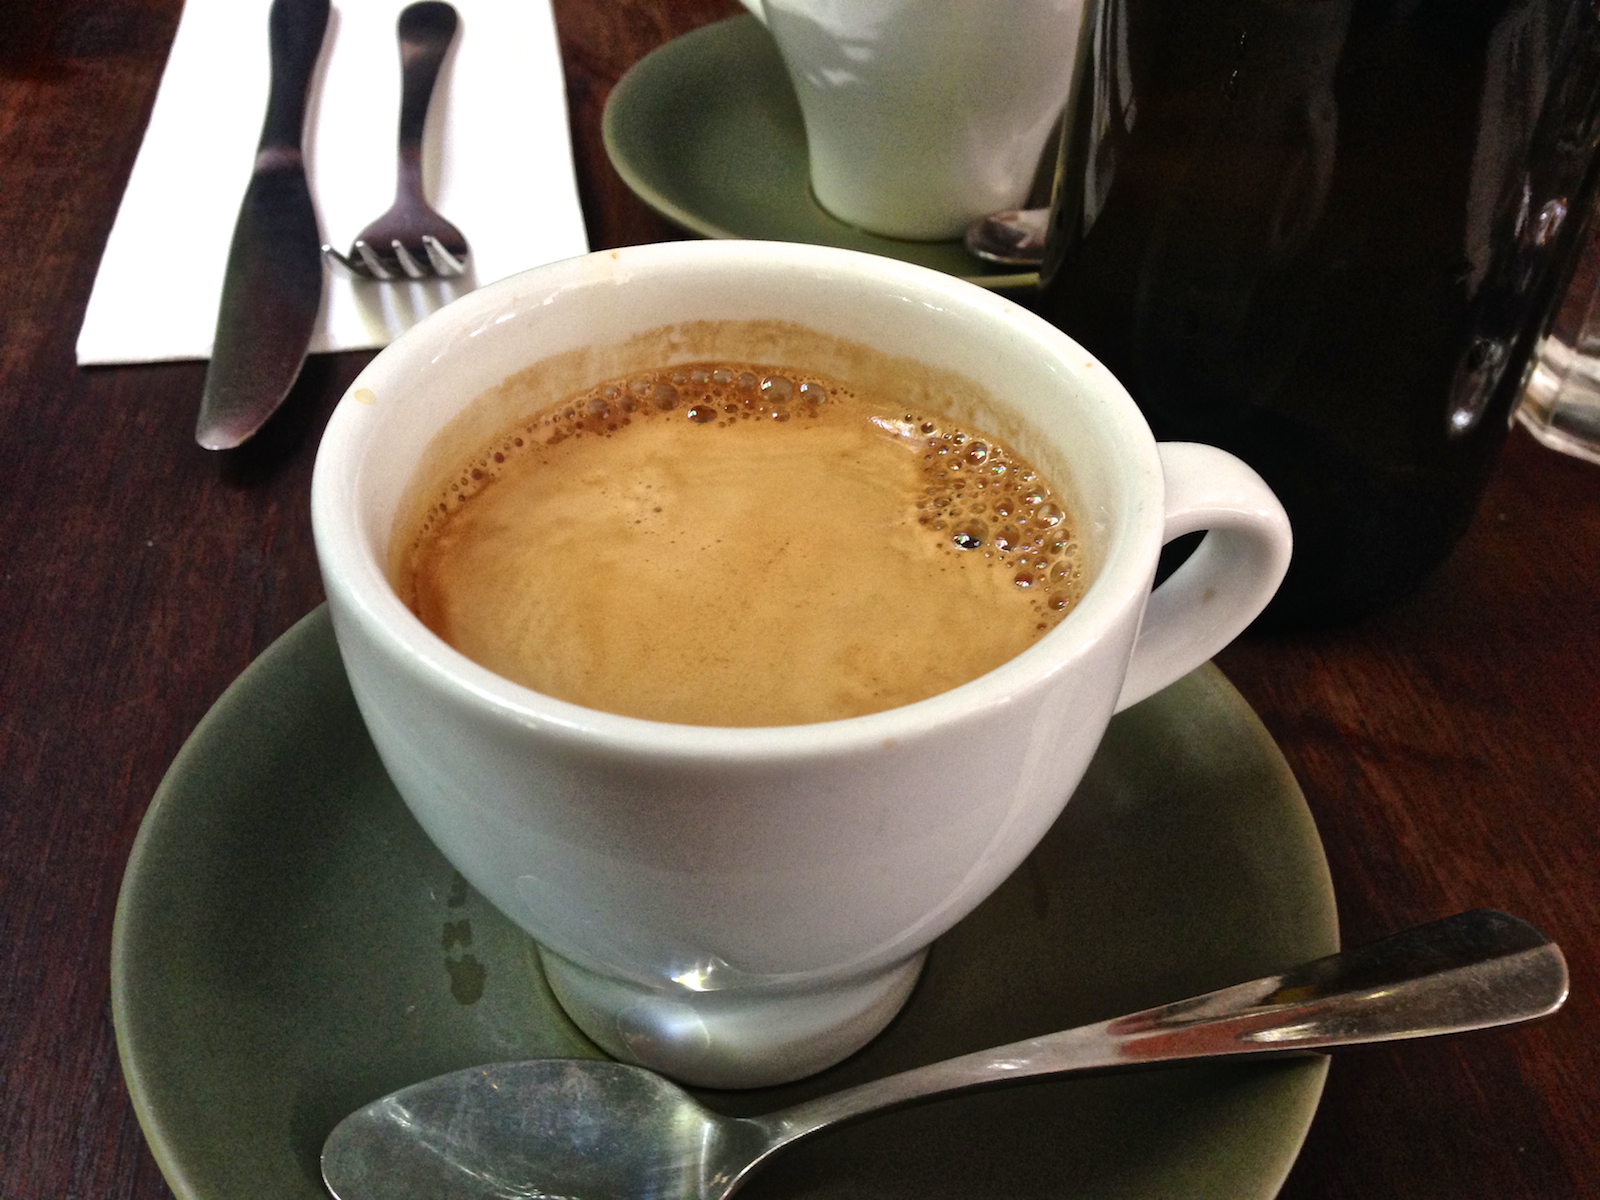 an image of a coffee cup on a plate